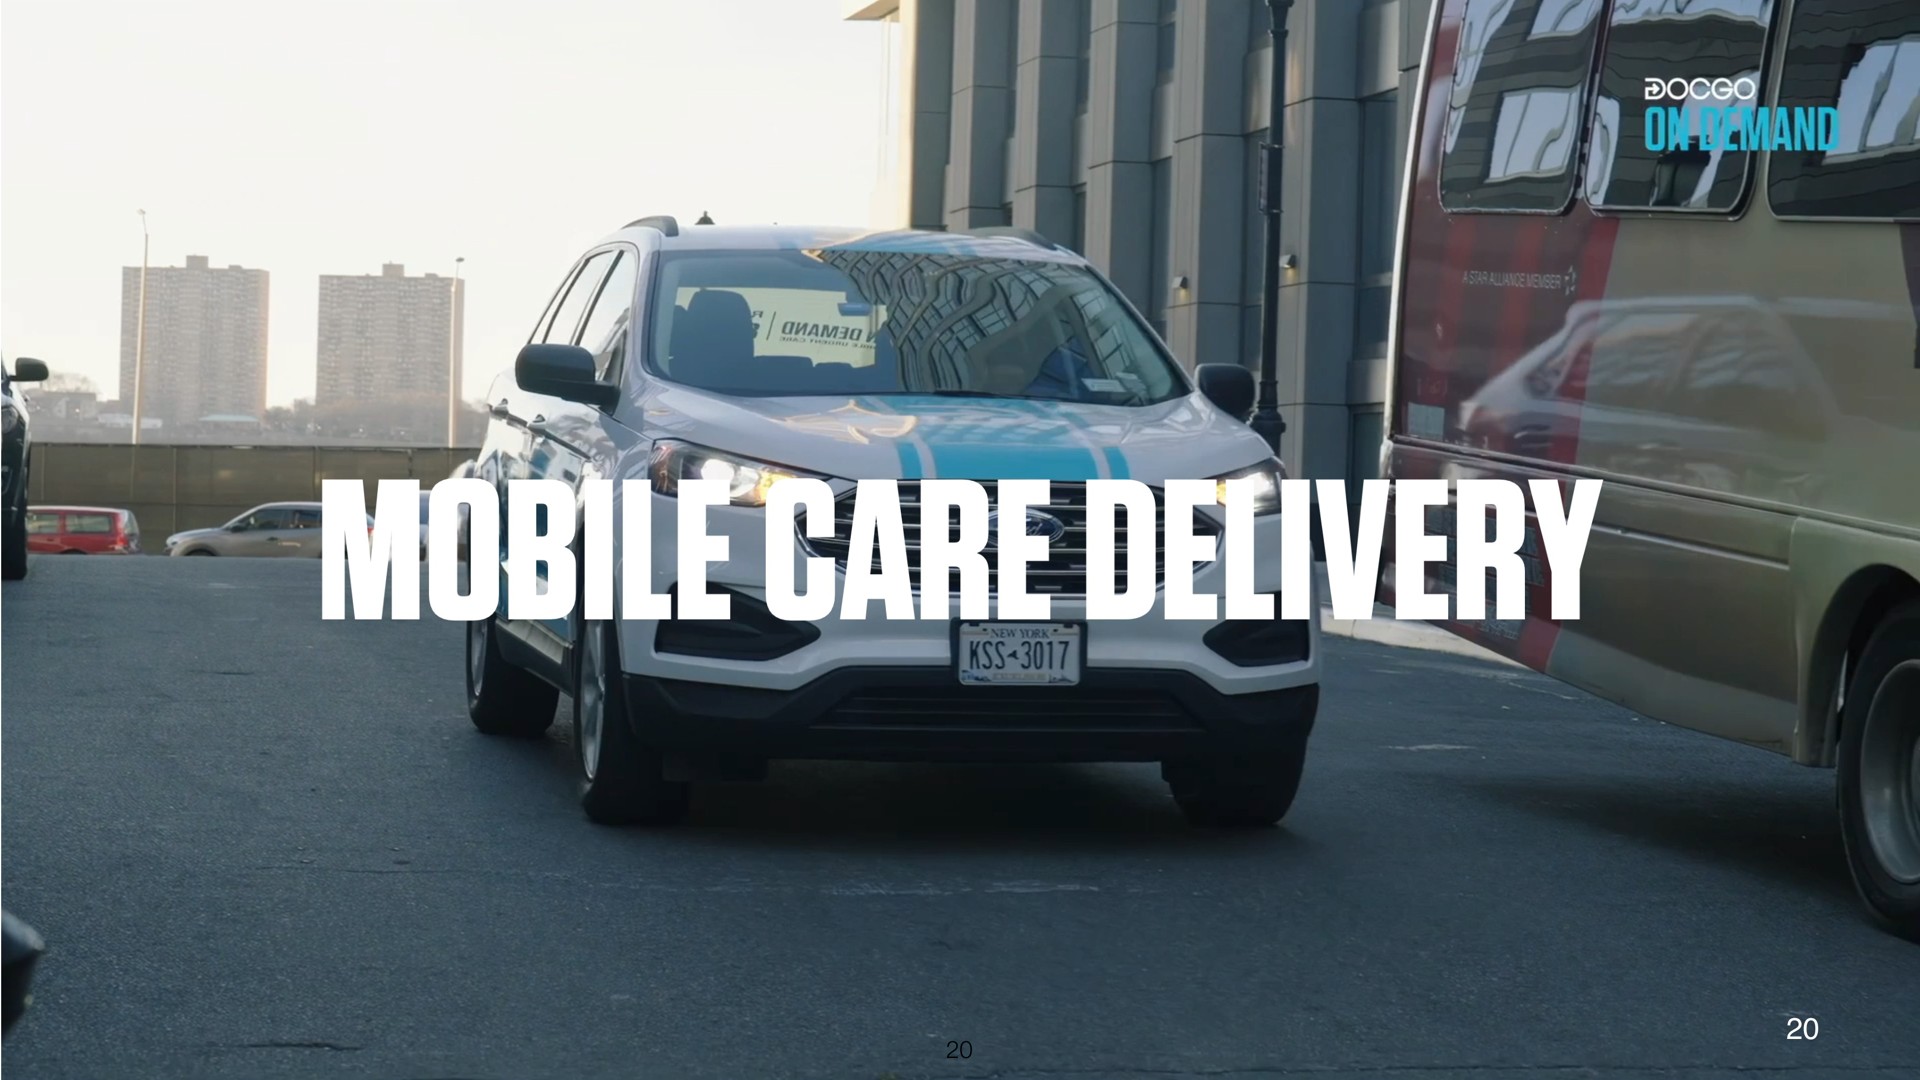 mobile care delivery | DocGo